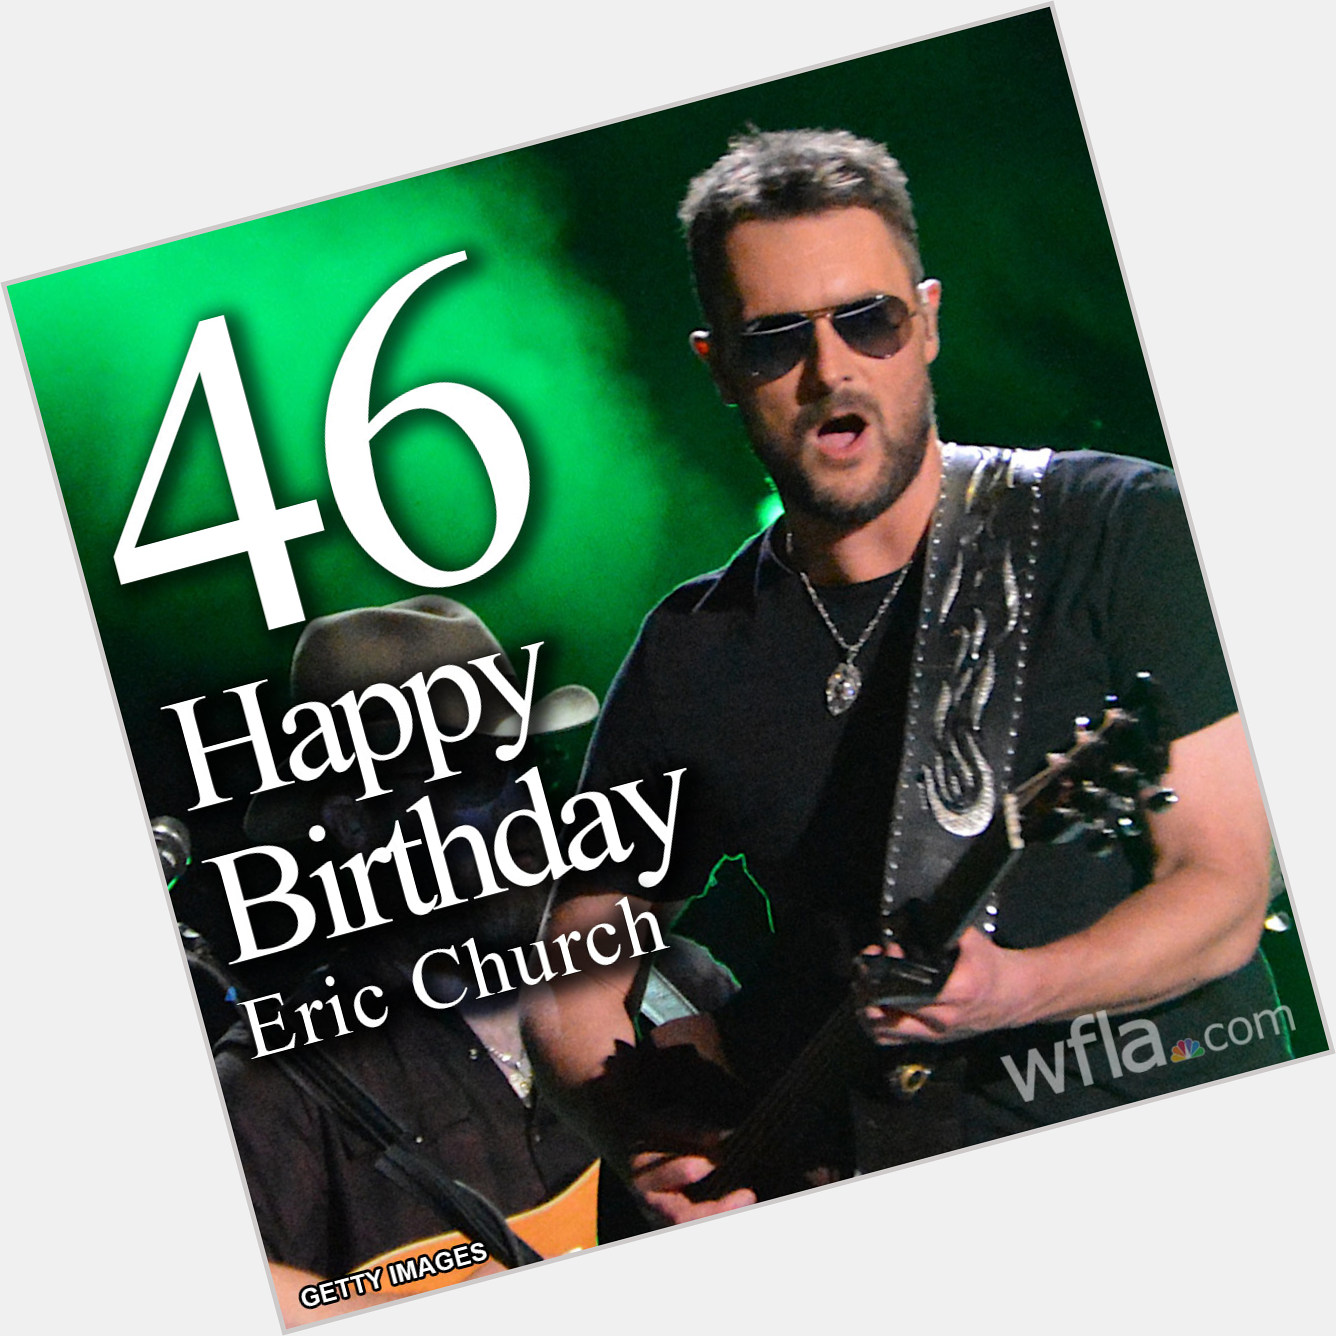 HAPPY BIRTHDAY, ERIC CHURCH The Grammy-nominated country star turns 46 today!  